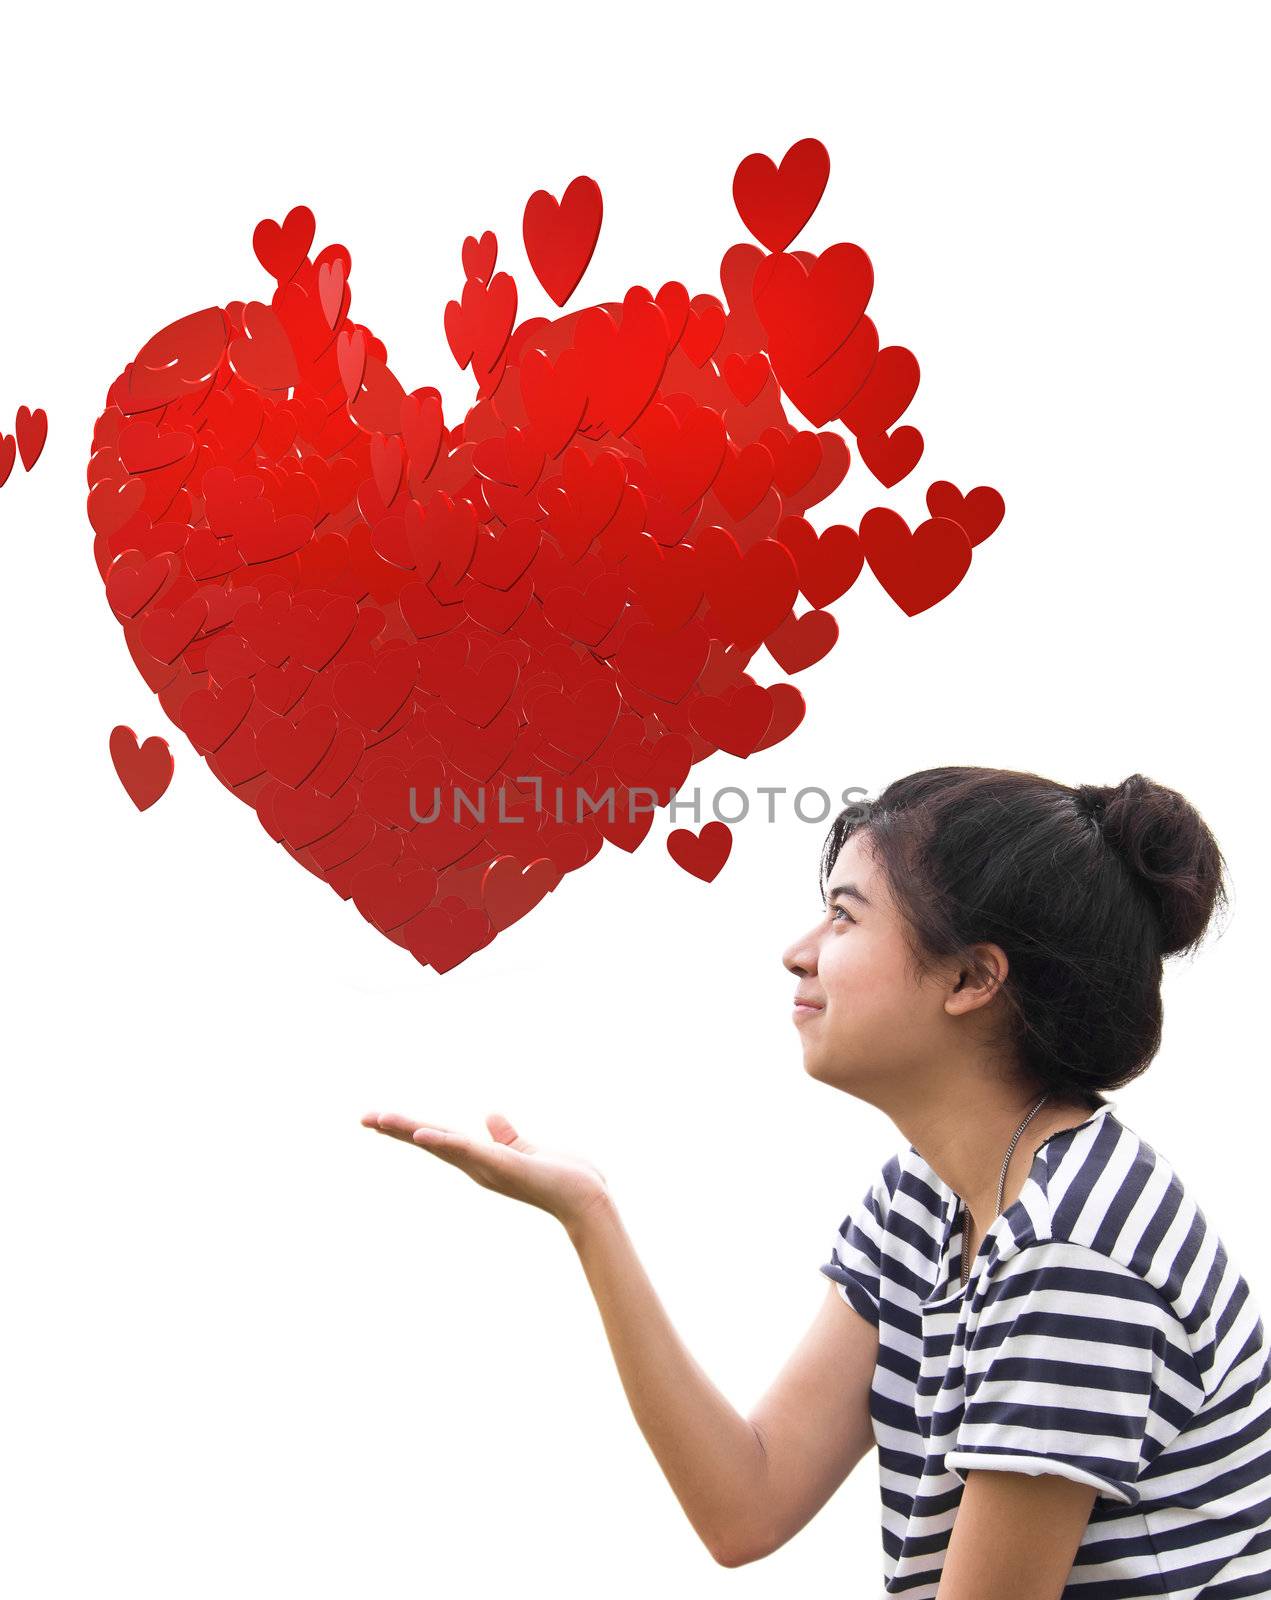 Romantic young woman holding a big heart composed of small red hearts in hands